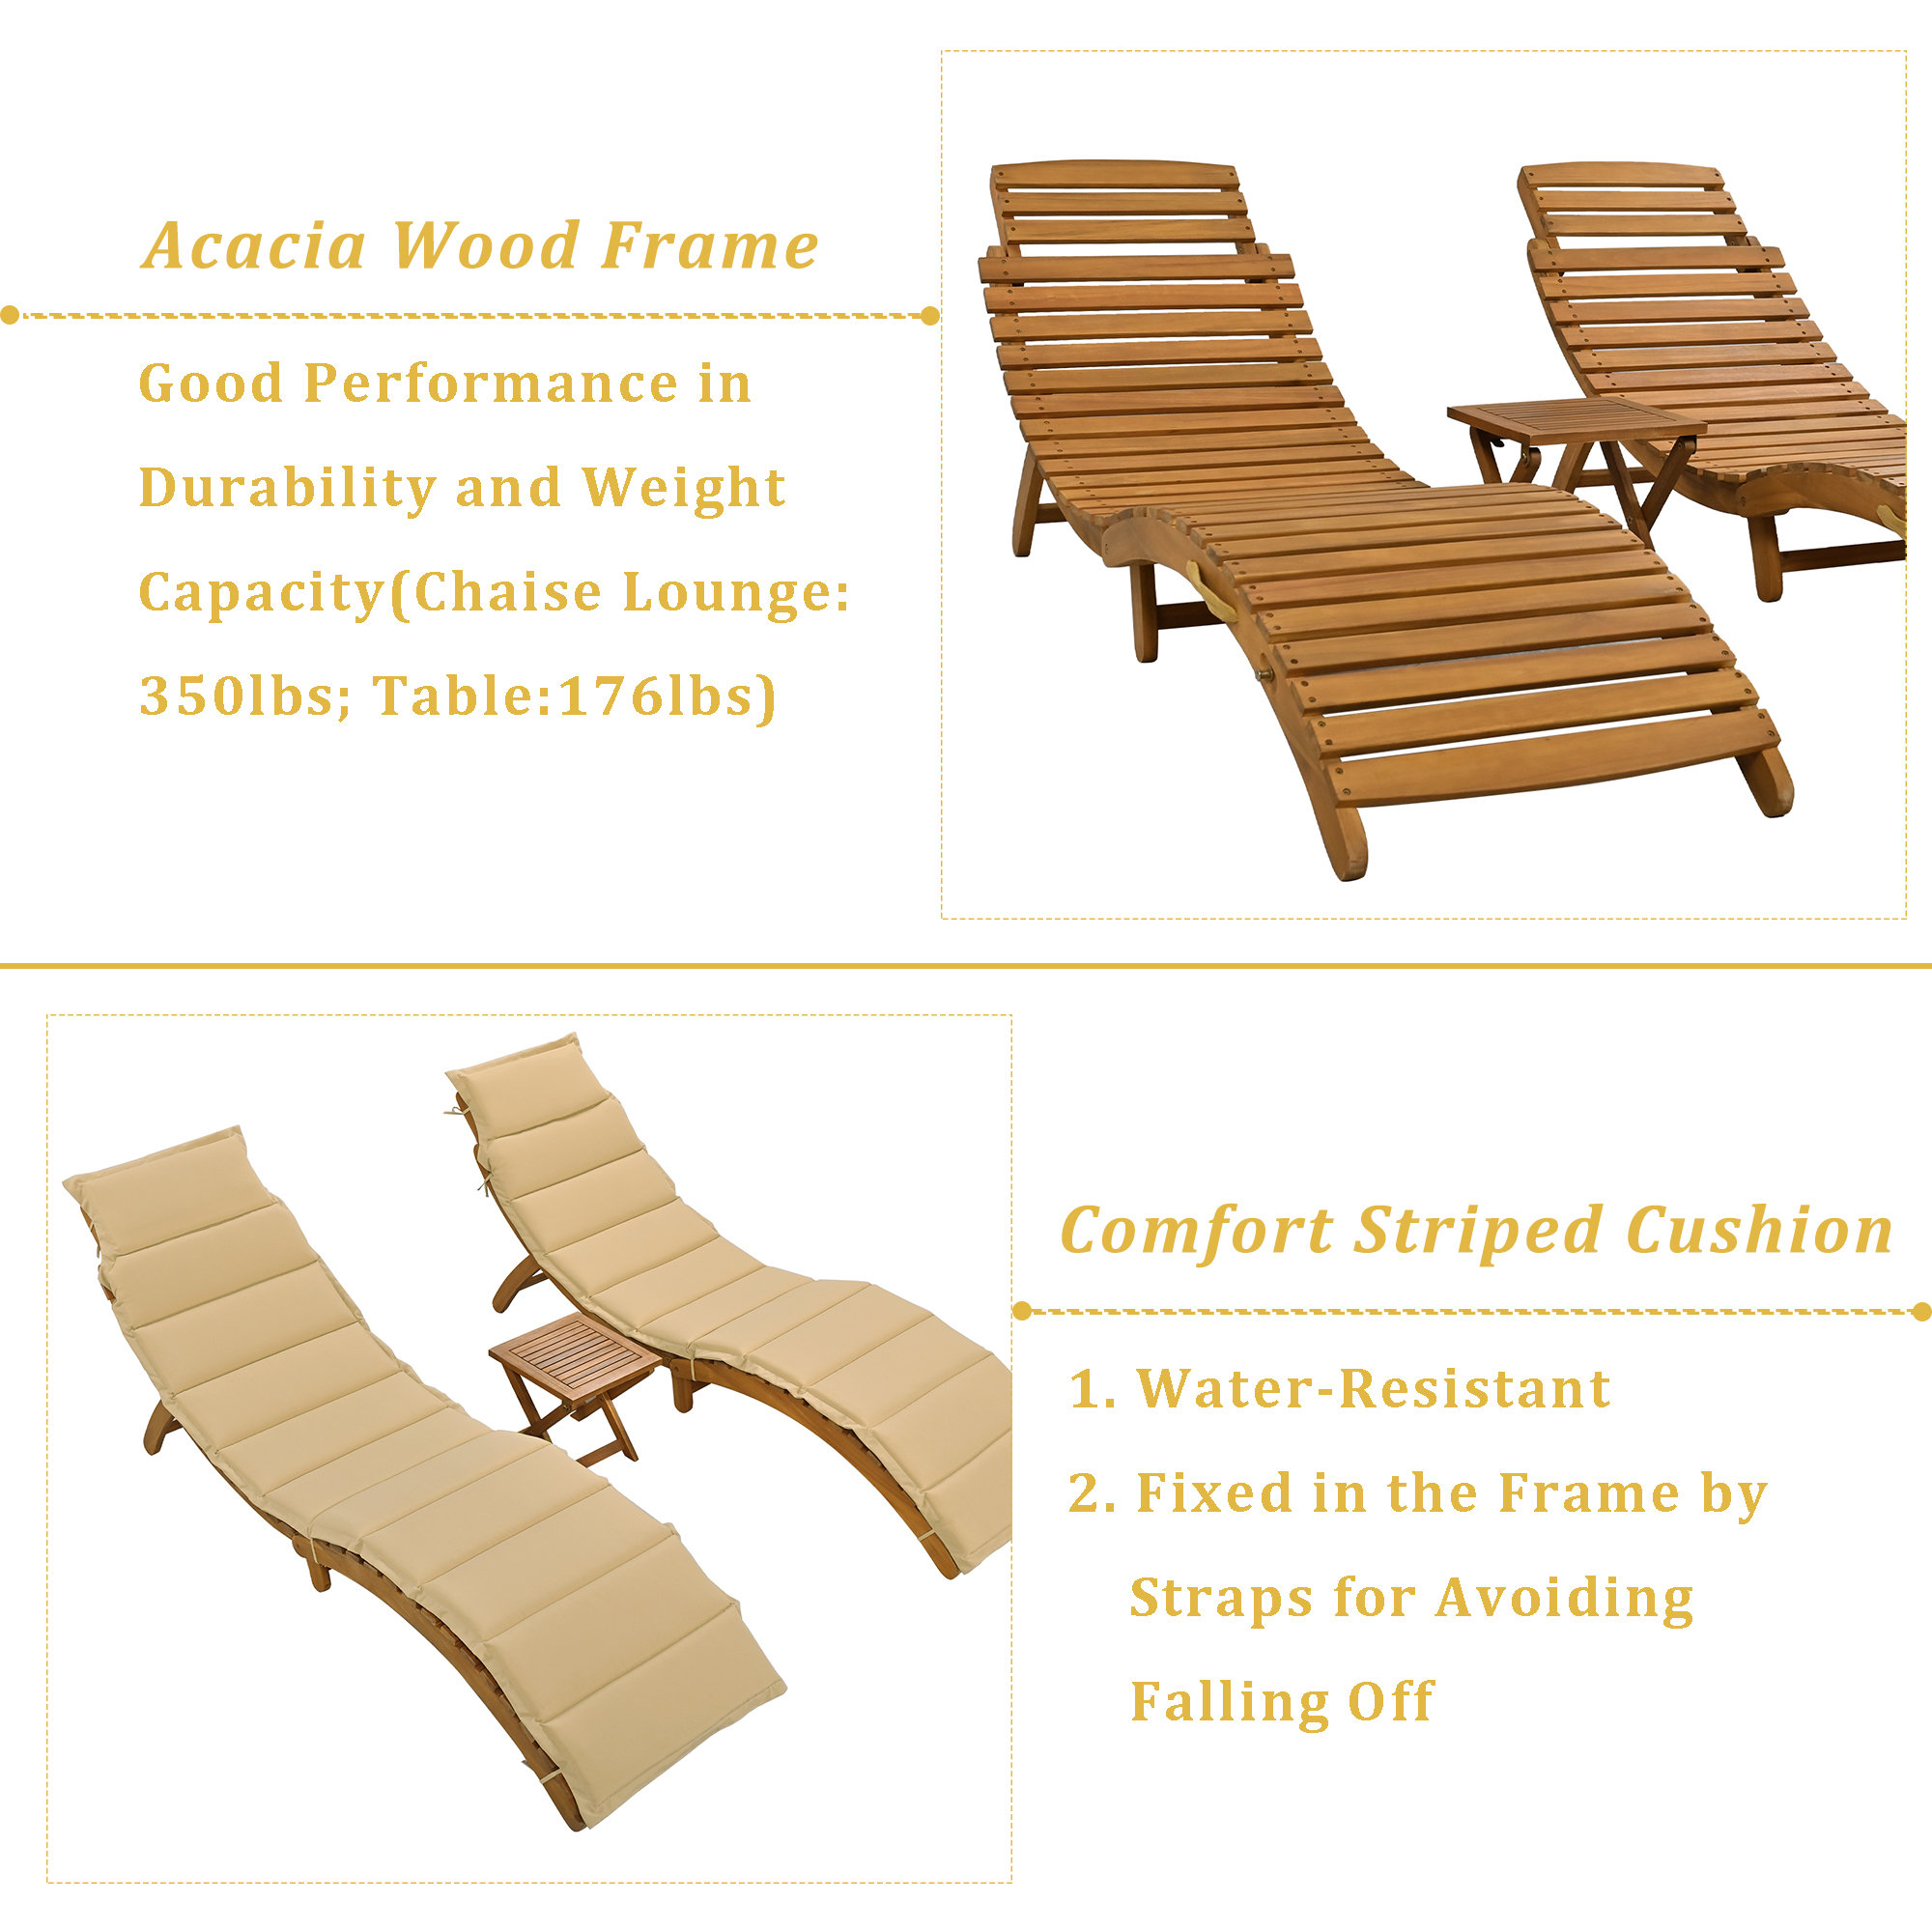 Wooden Patio Lounge Chairs, 3 Pieces S-shape Outdoor Chaise Lounge with Tea Table and Soft Cushions, Reclining Pool Beach Deck Backyard Porch Chair - image 5 of 11